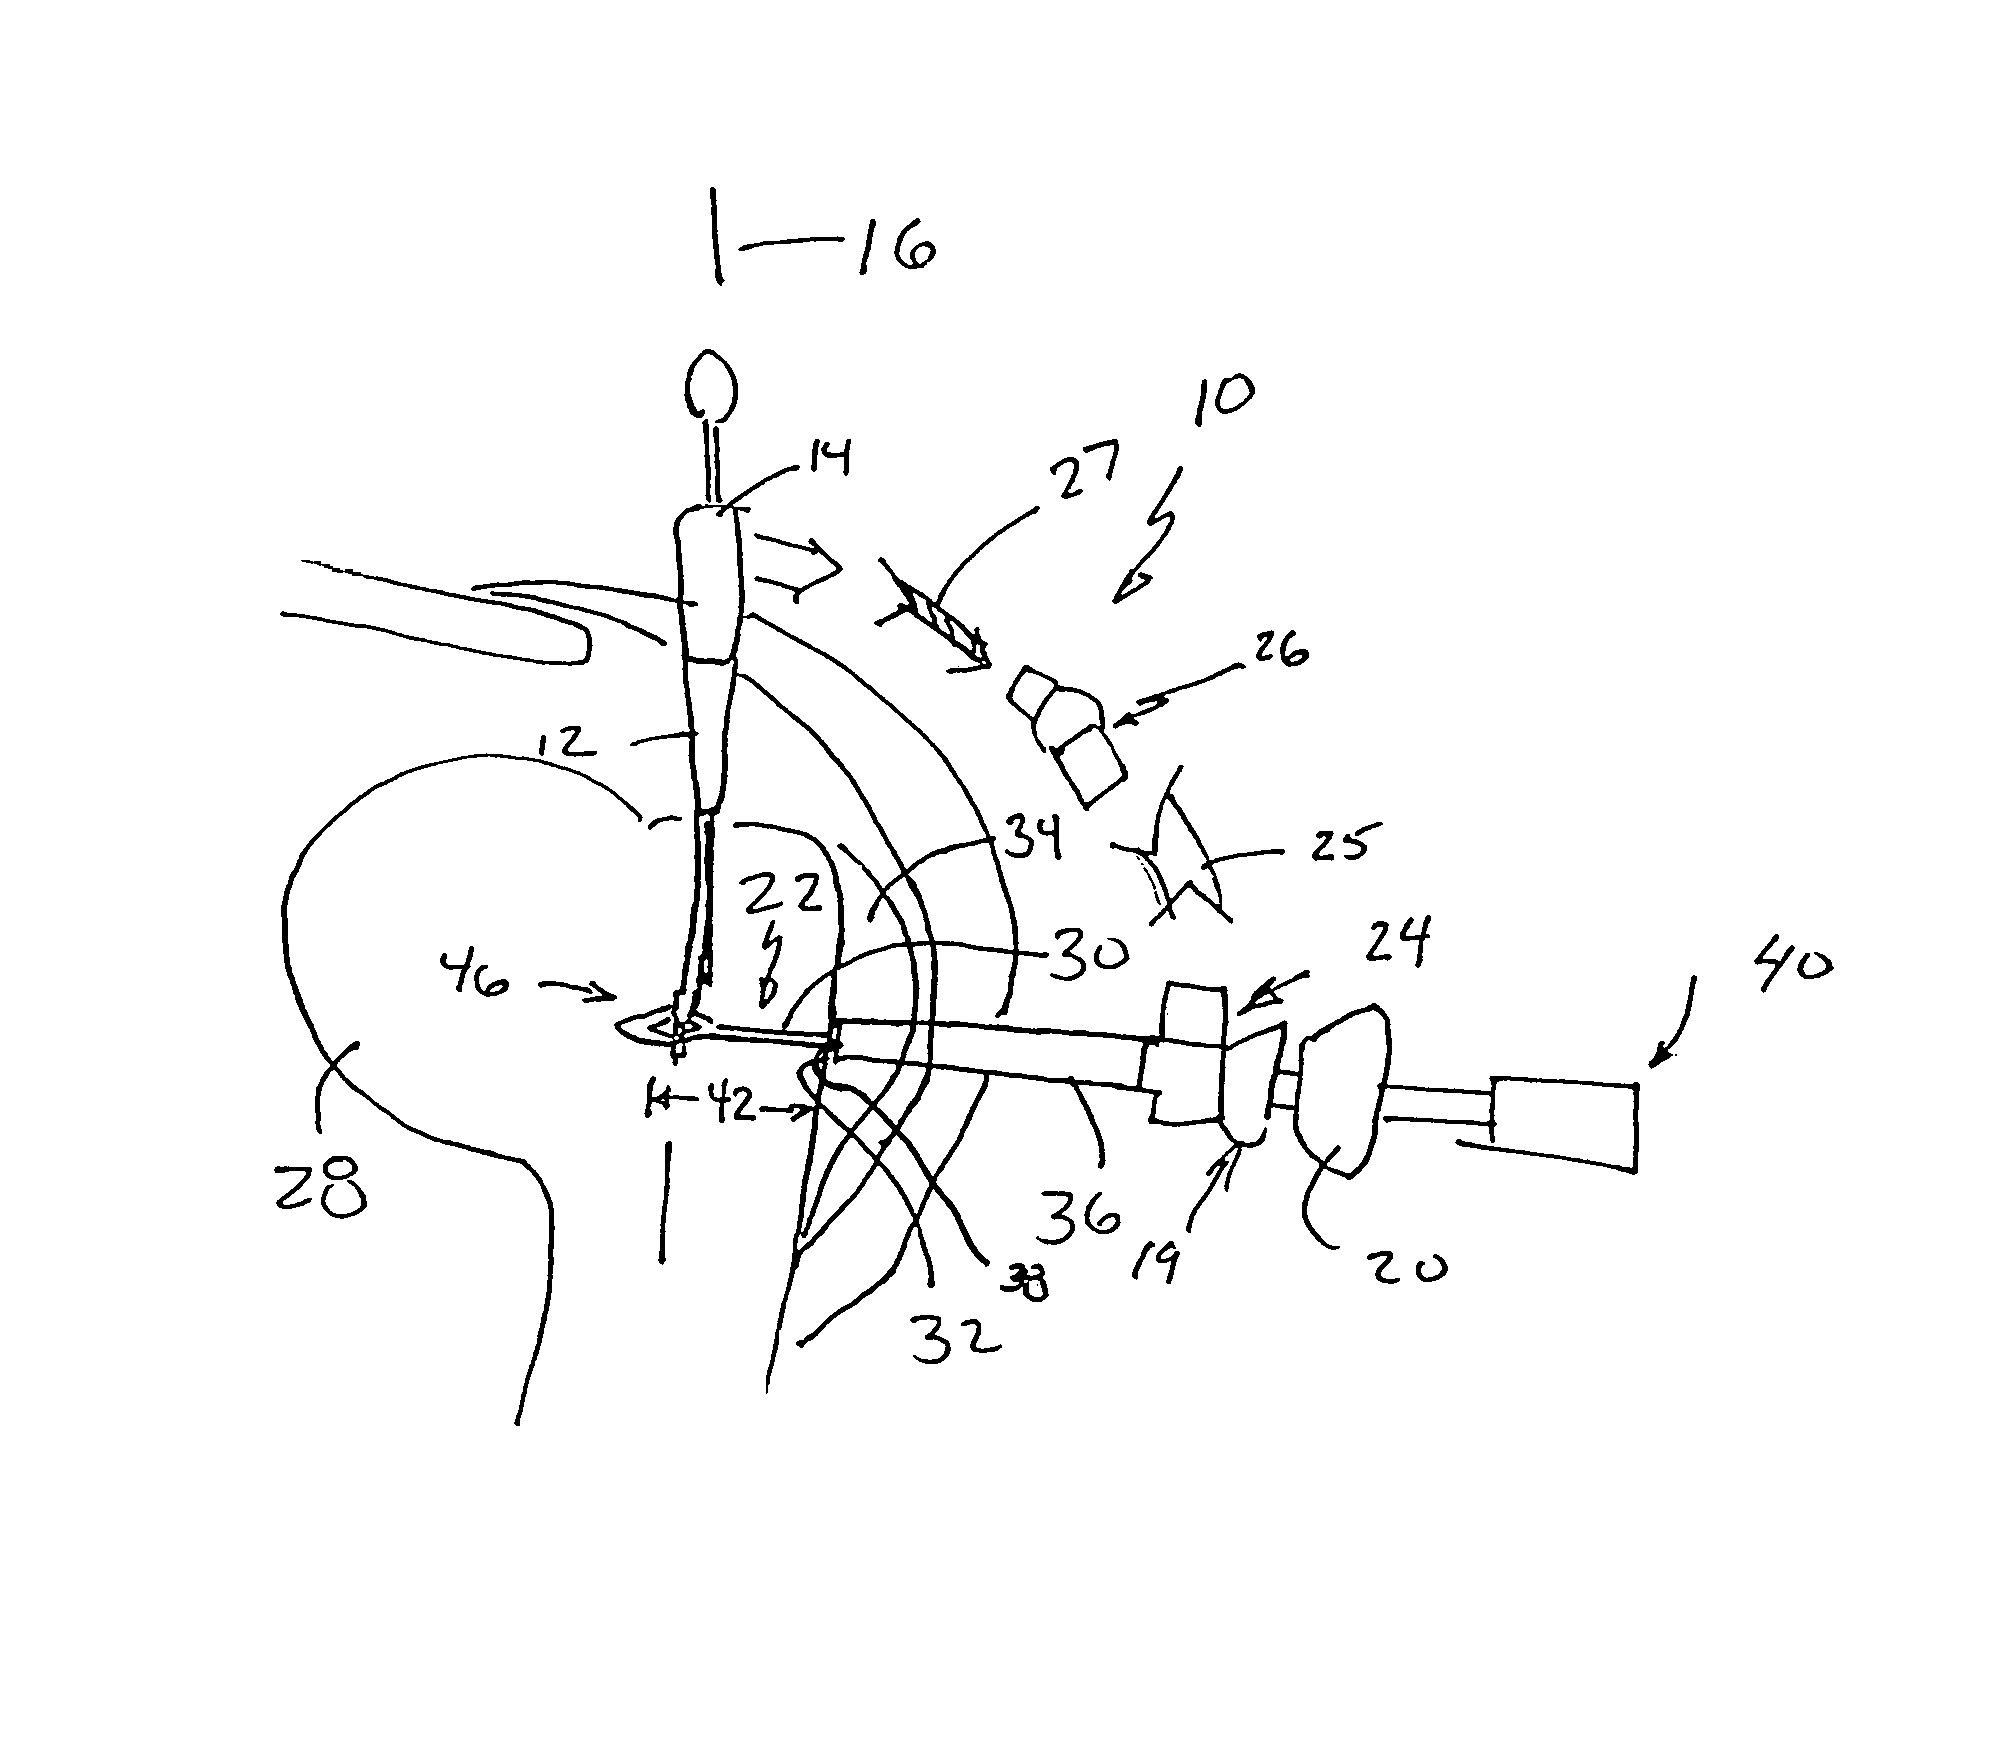 Surgical drill guide with awl and method of use